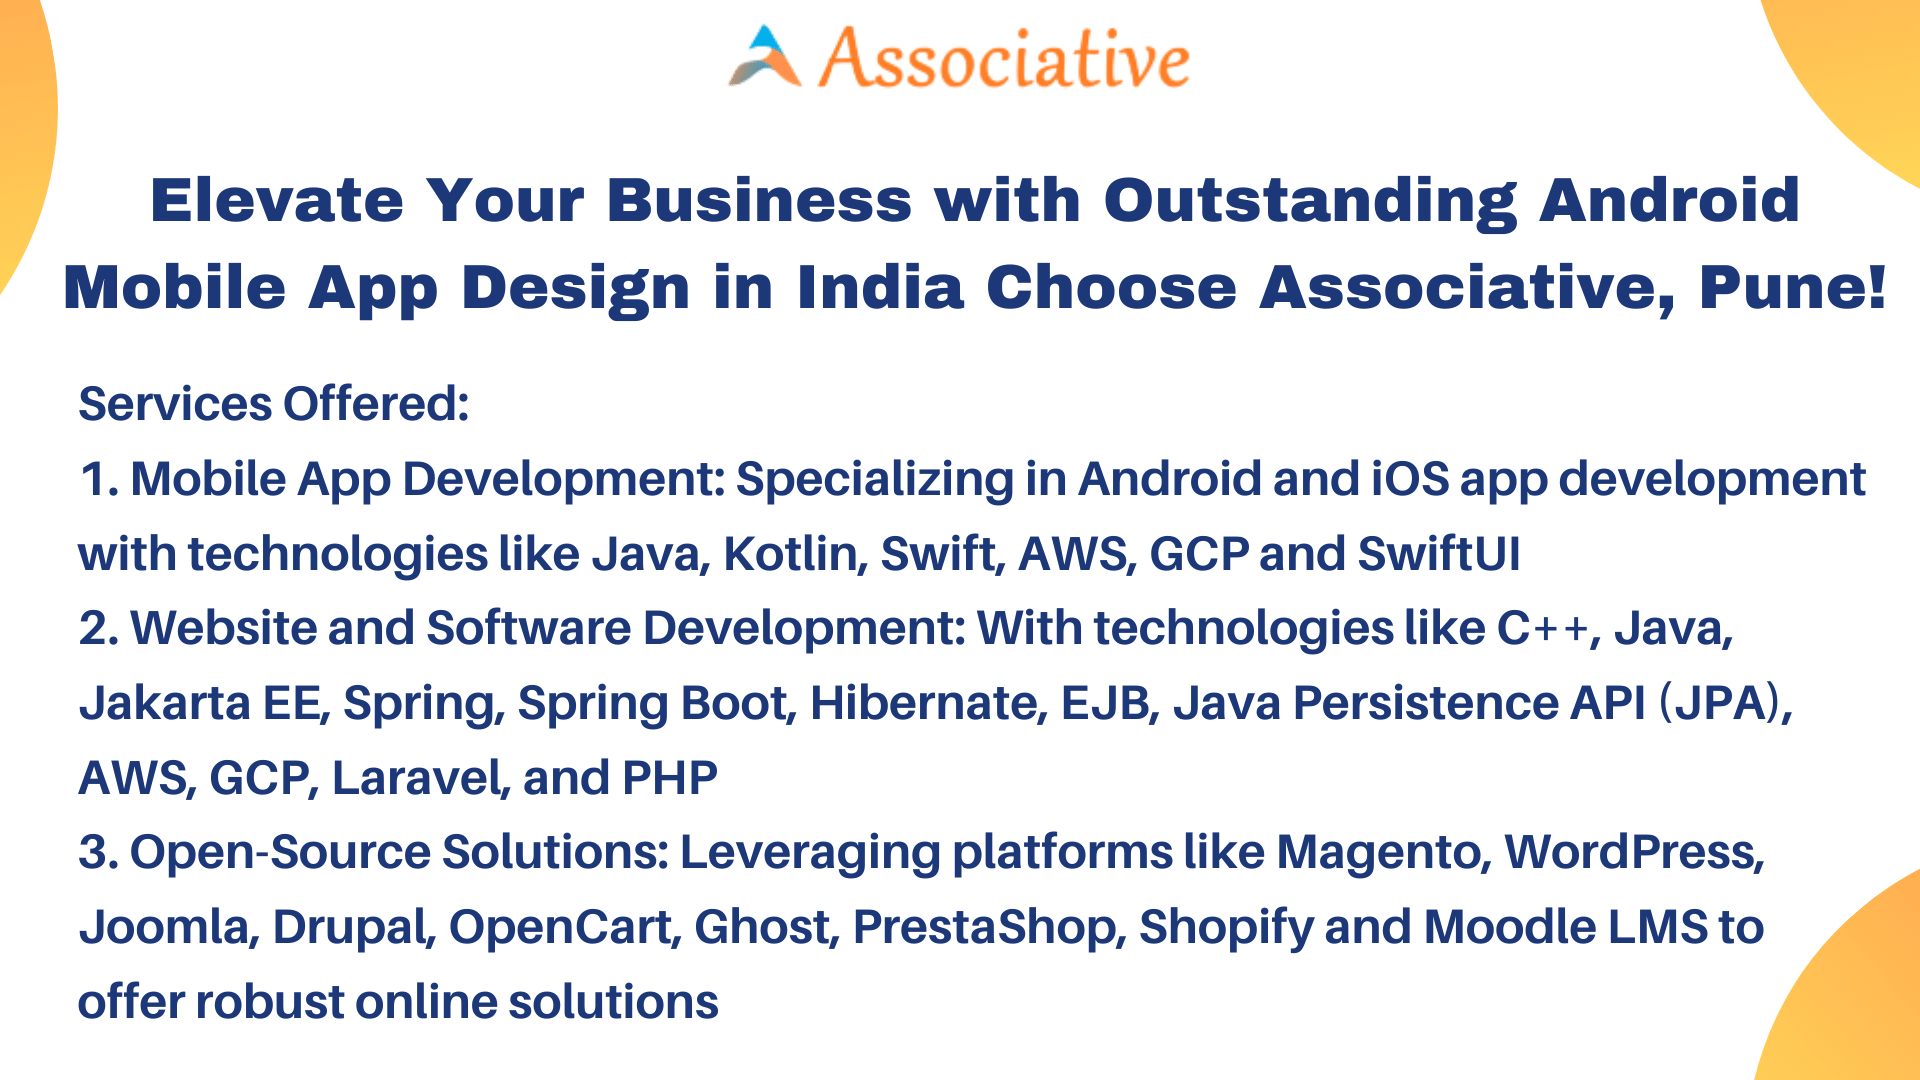 Elevate Your Business with Outstanding Android Mobile App Design in India Choose Associative, Pune!